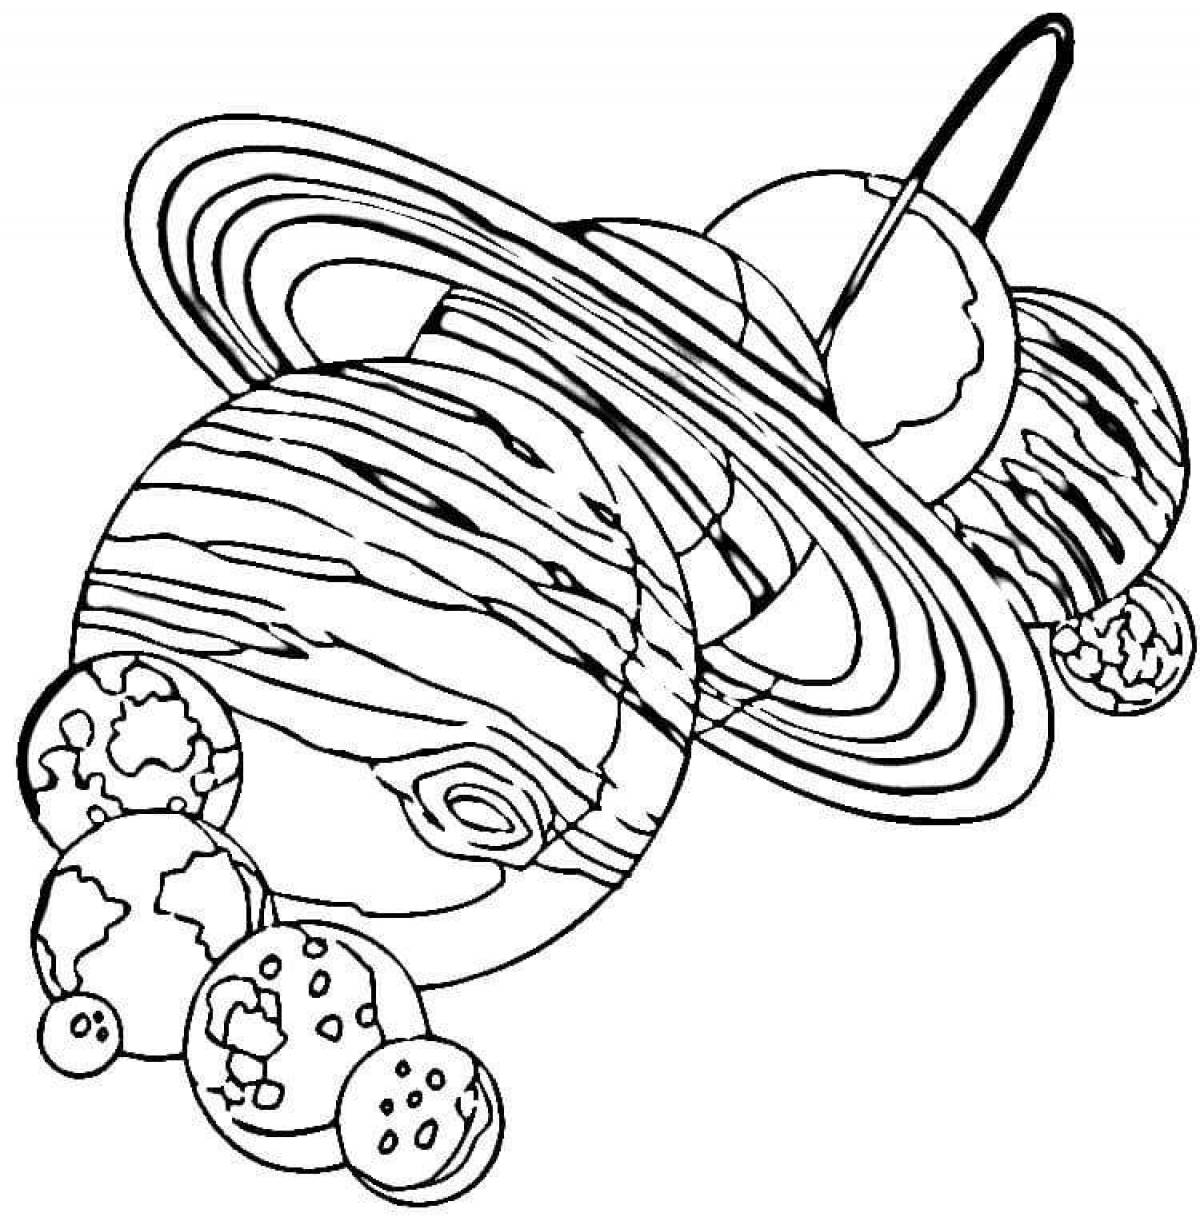 Inspirational solar system coloring book for kids